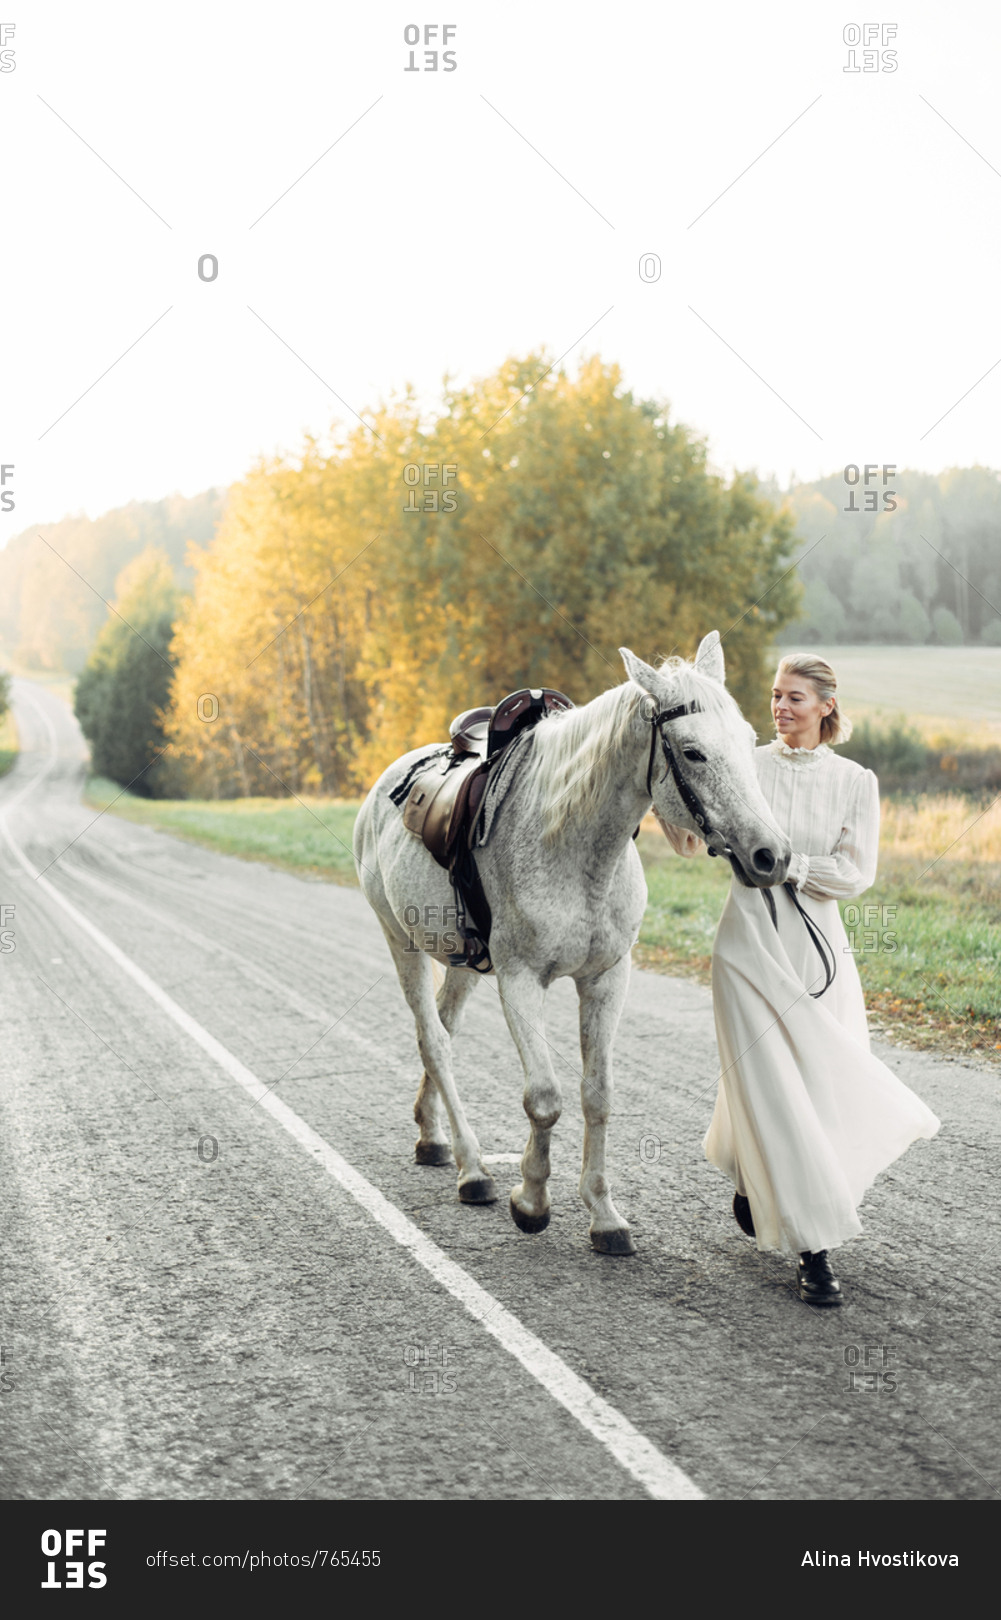 Blonde woman wearing vintage dress walking on country road with horse